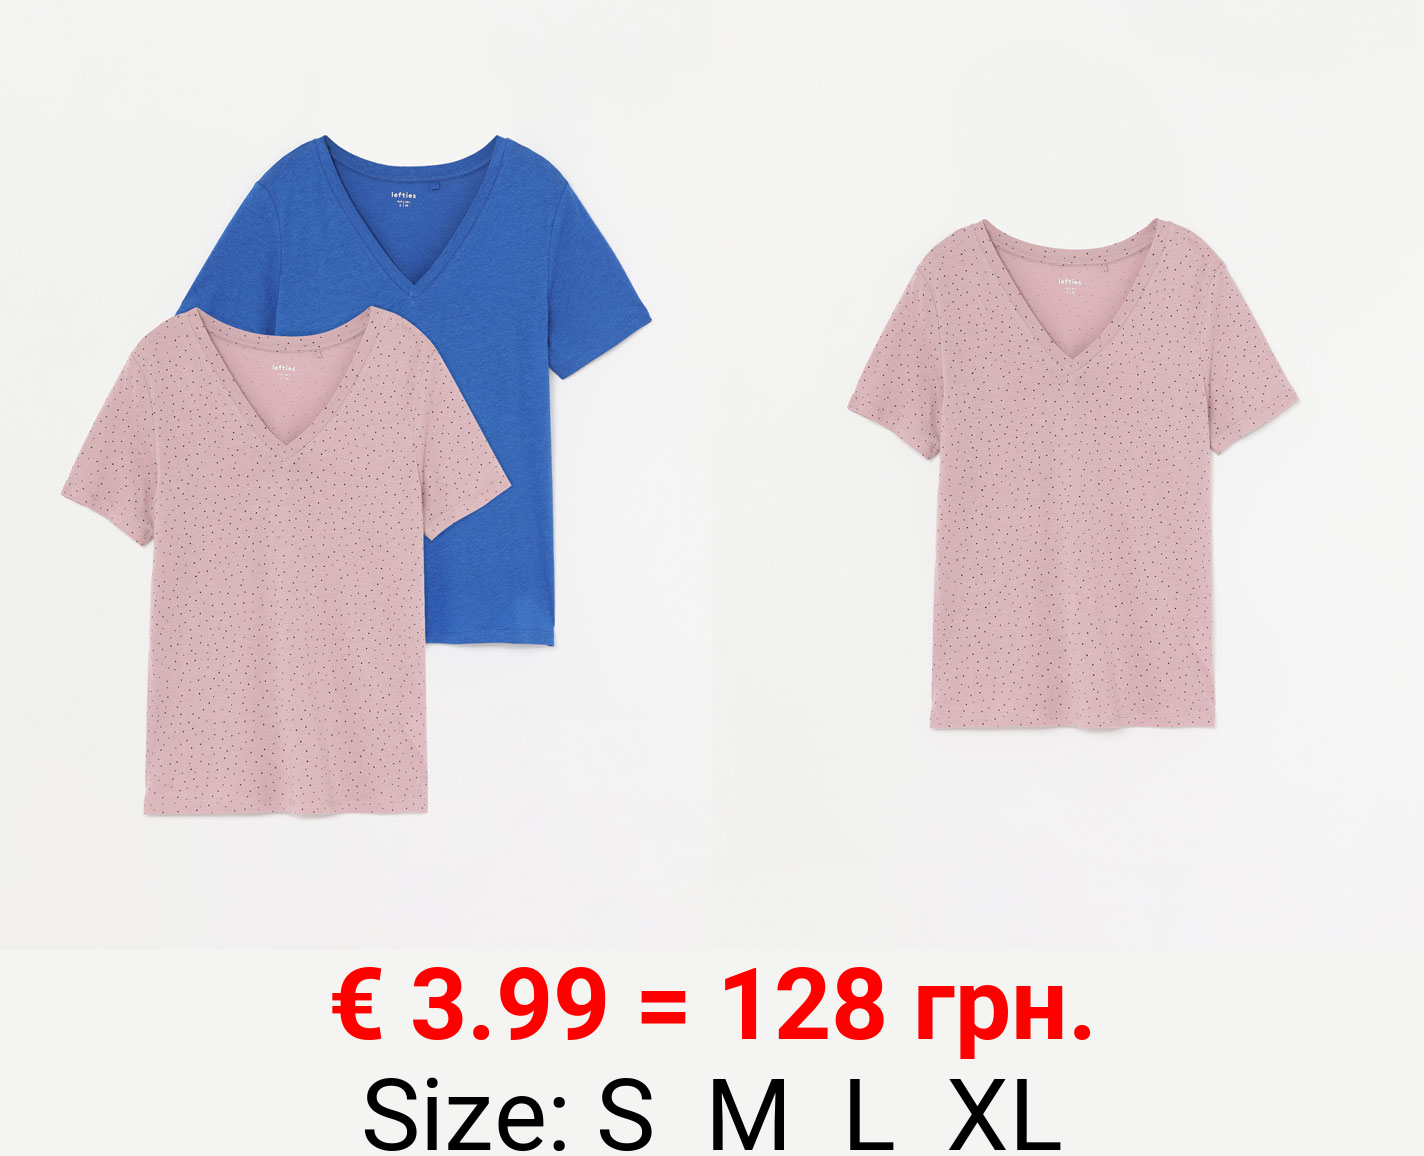 2-Pack of plain and printed V-neck T-shirts